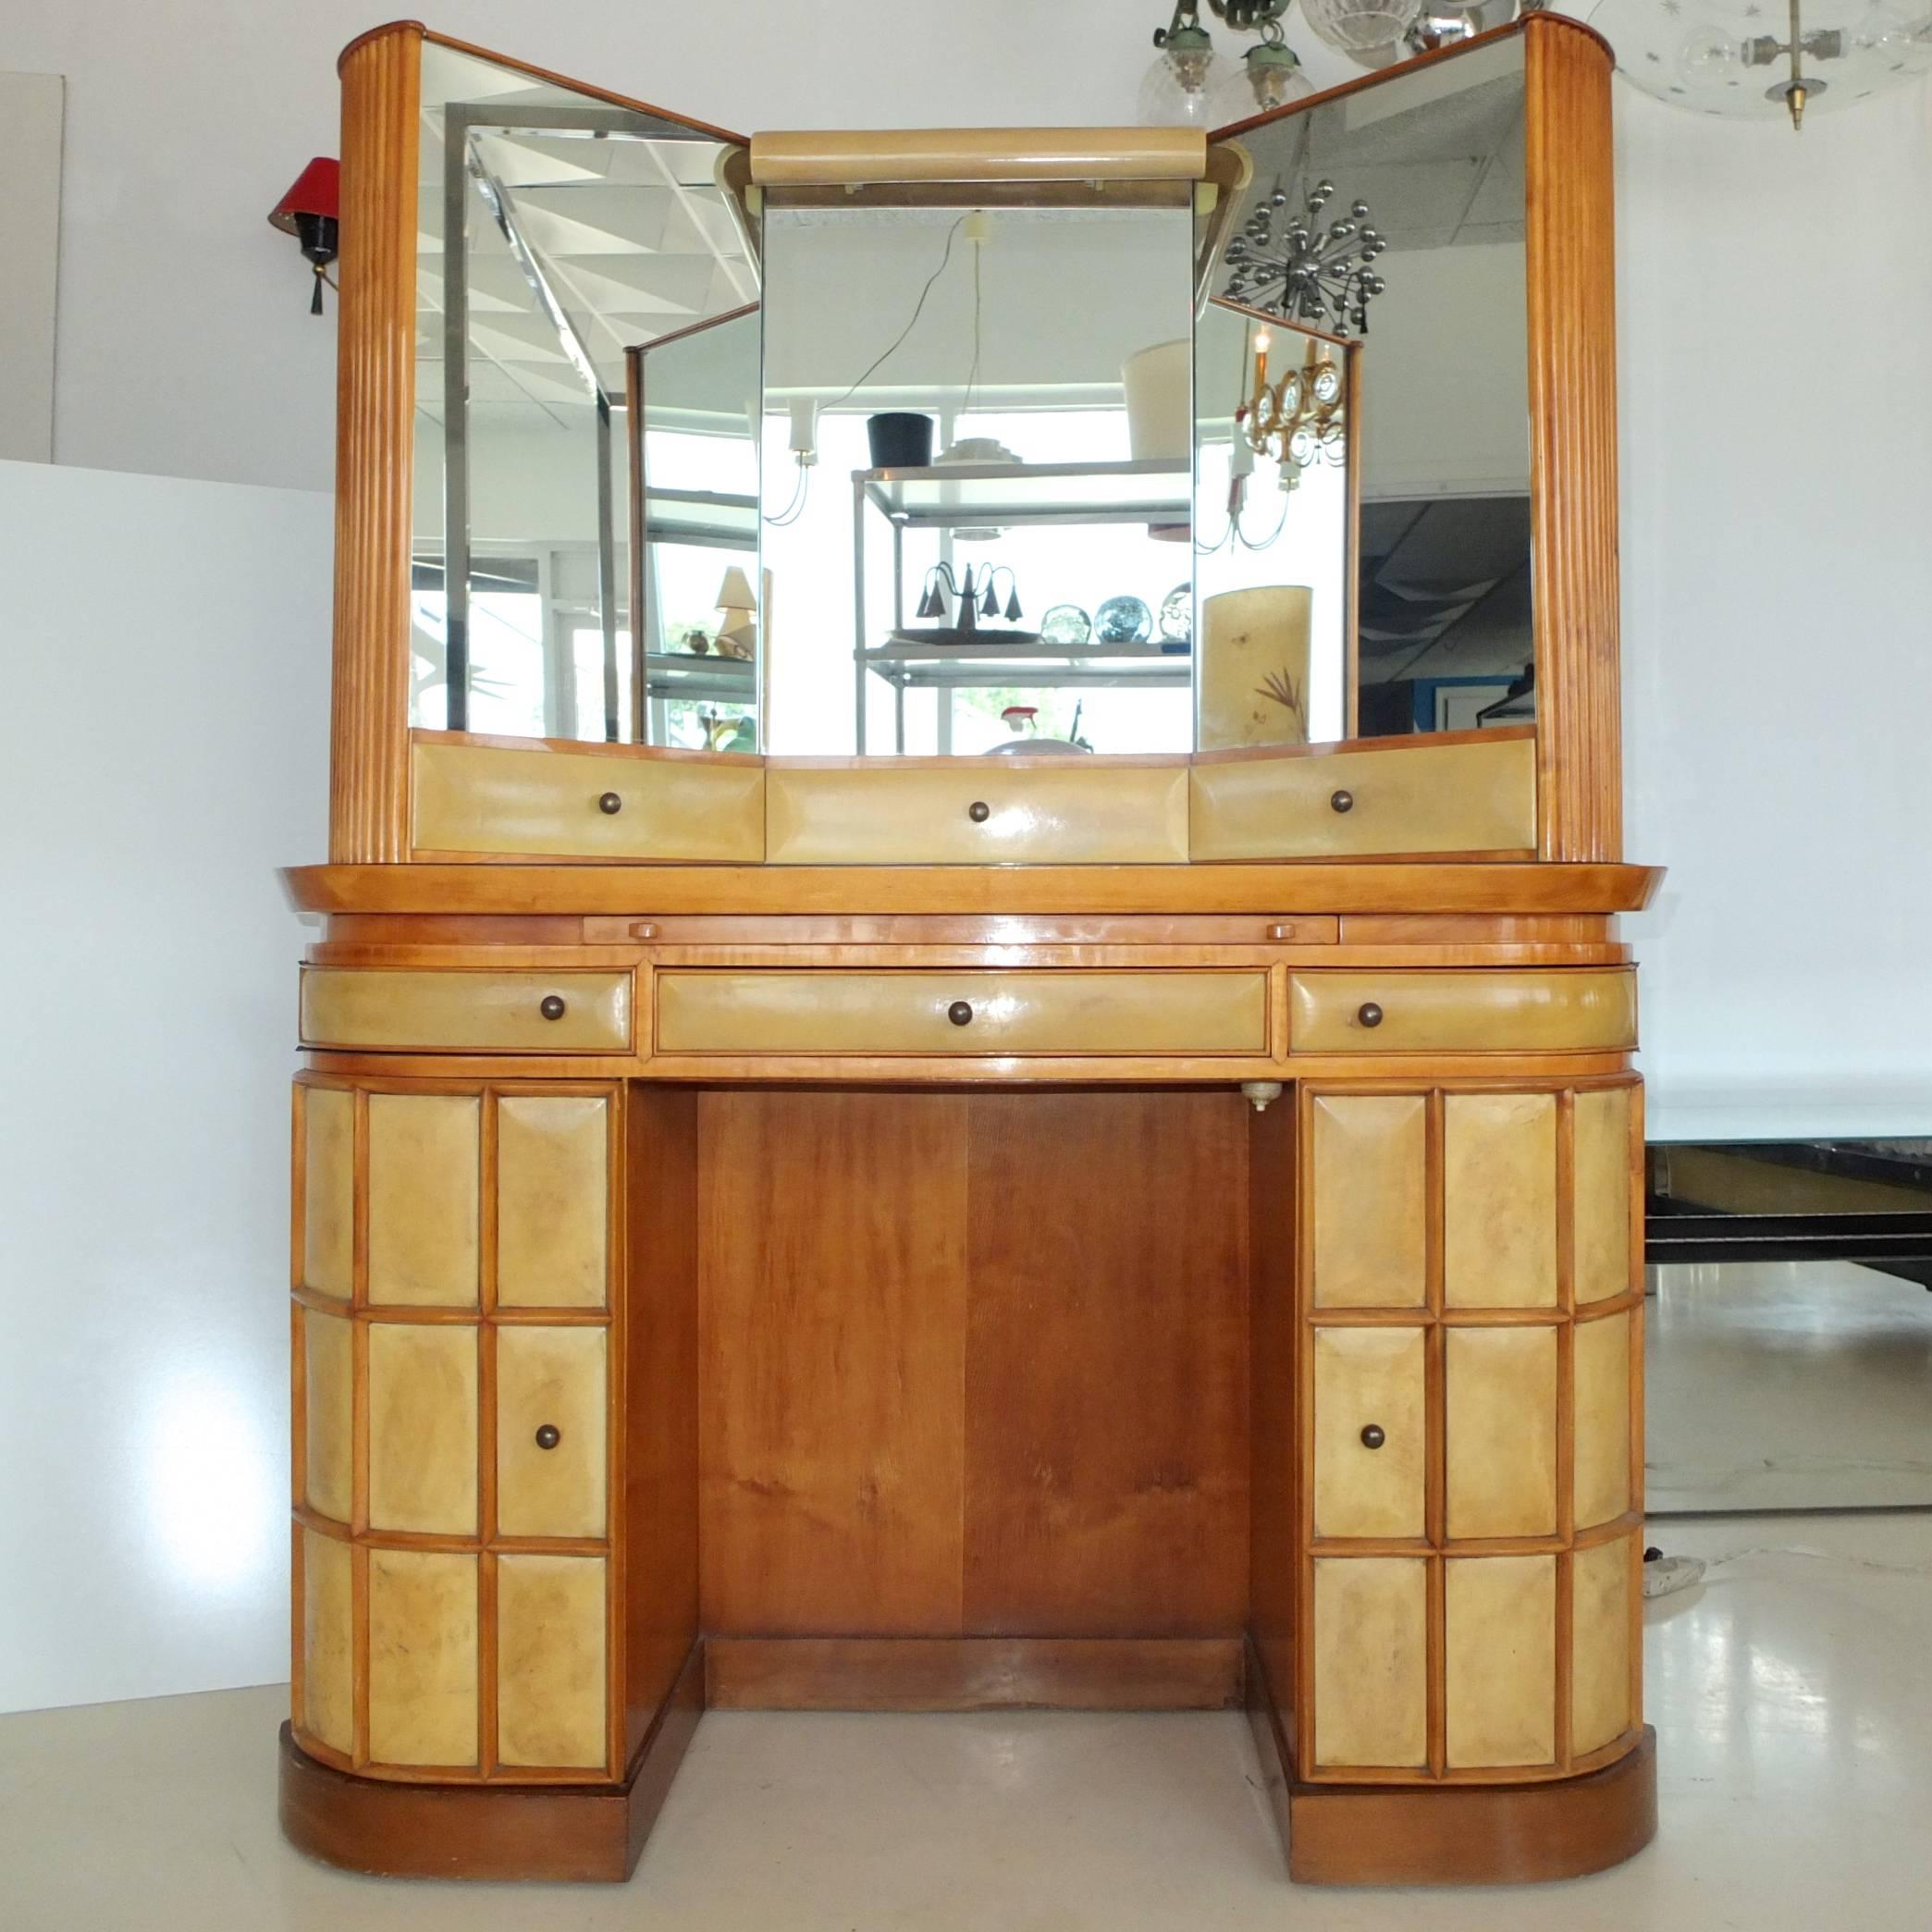 Custom Italian vanity, dressing table or secretary with triptych mirror, in parchment and fruitwood, possibly pear wood, attributed to Paolo Buffa. Italy, circa 1935.

The table and mirror are one unit and are not intended to detach. The entire